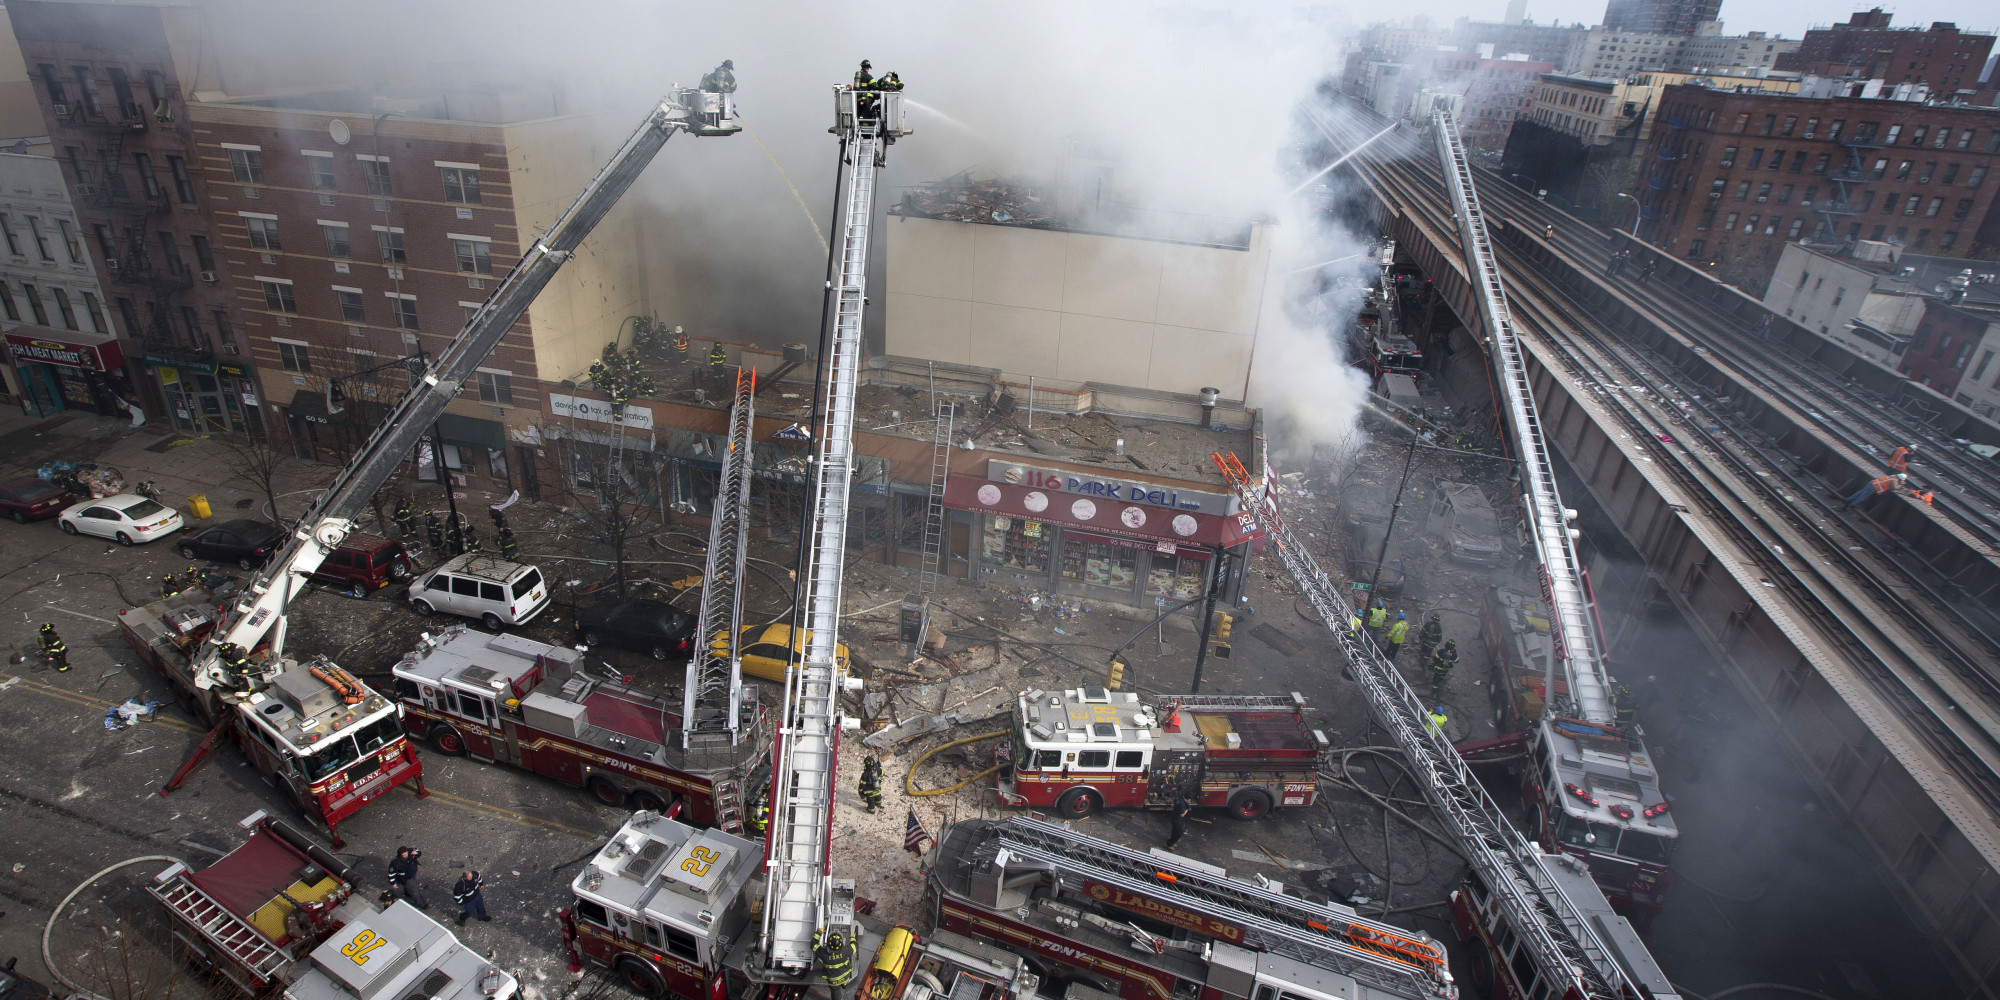 Harlem Explosion Causes Collapse Of 2 Buildings Multiple Deaths    